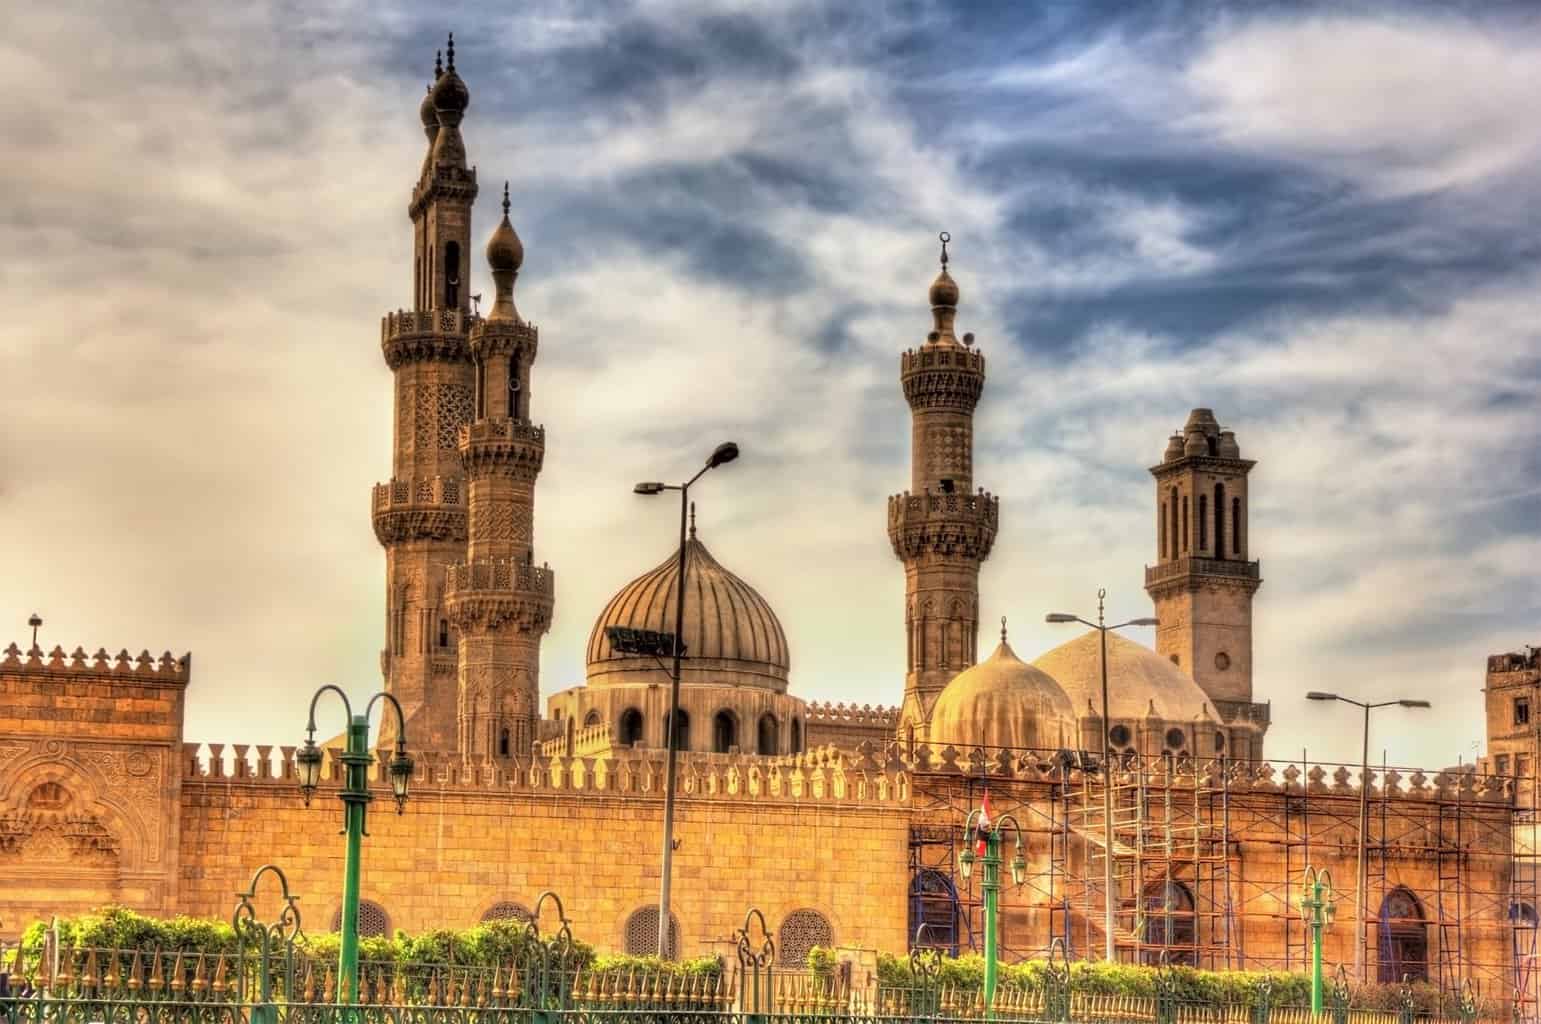 Al Azhar Mosque min scaled The oldest section or district in Cairo is described by many names, either Old Cairo, Islamic Cairo, Cairo of Al-Muizz, Historic Cairo, or Medieval Cairo, it mainly refers to the historical areas of Cairo, which existed before the modern expansion of the city during the 19th and 20th centuries, especially the central parts around the old walled city and the Cairo Citadel. 